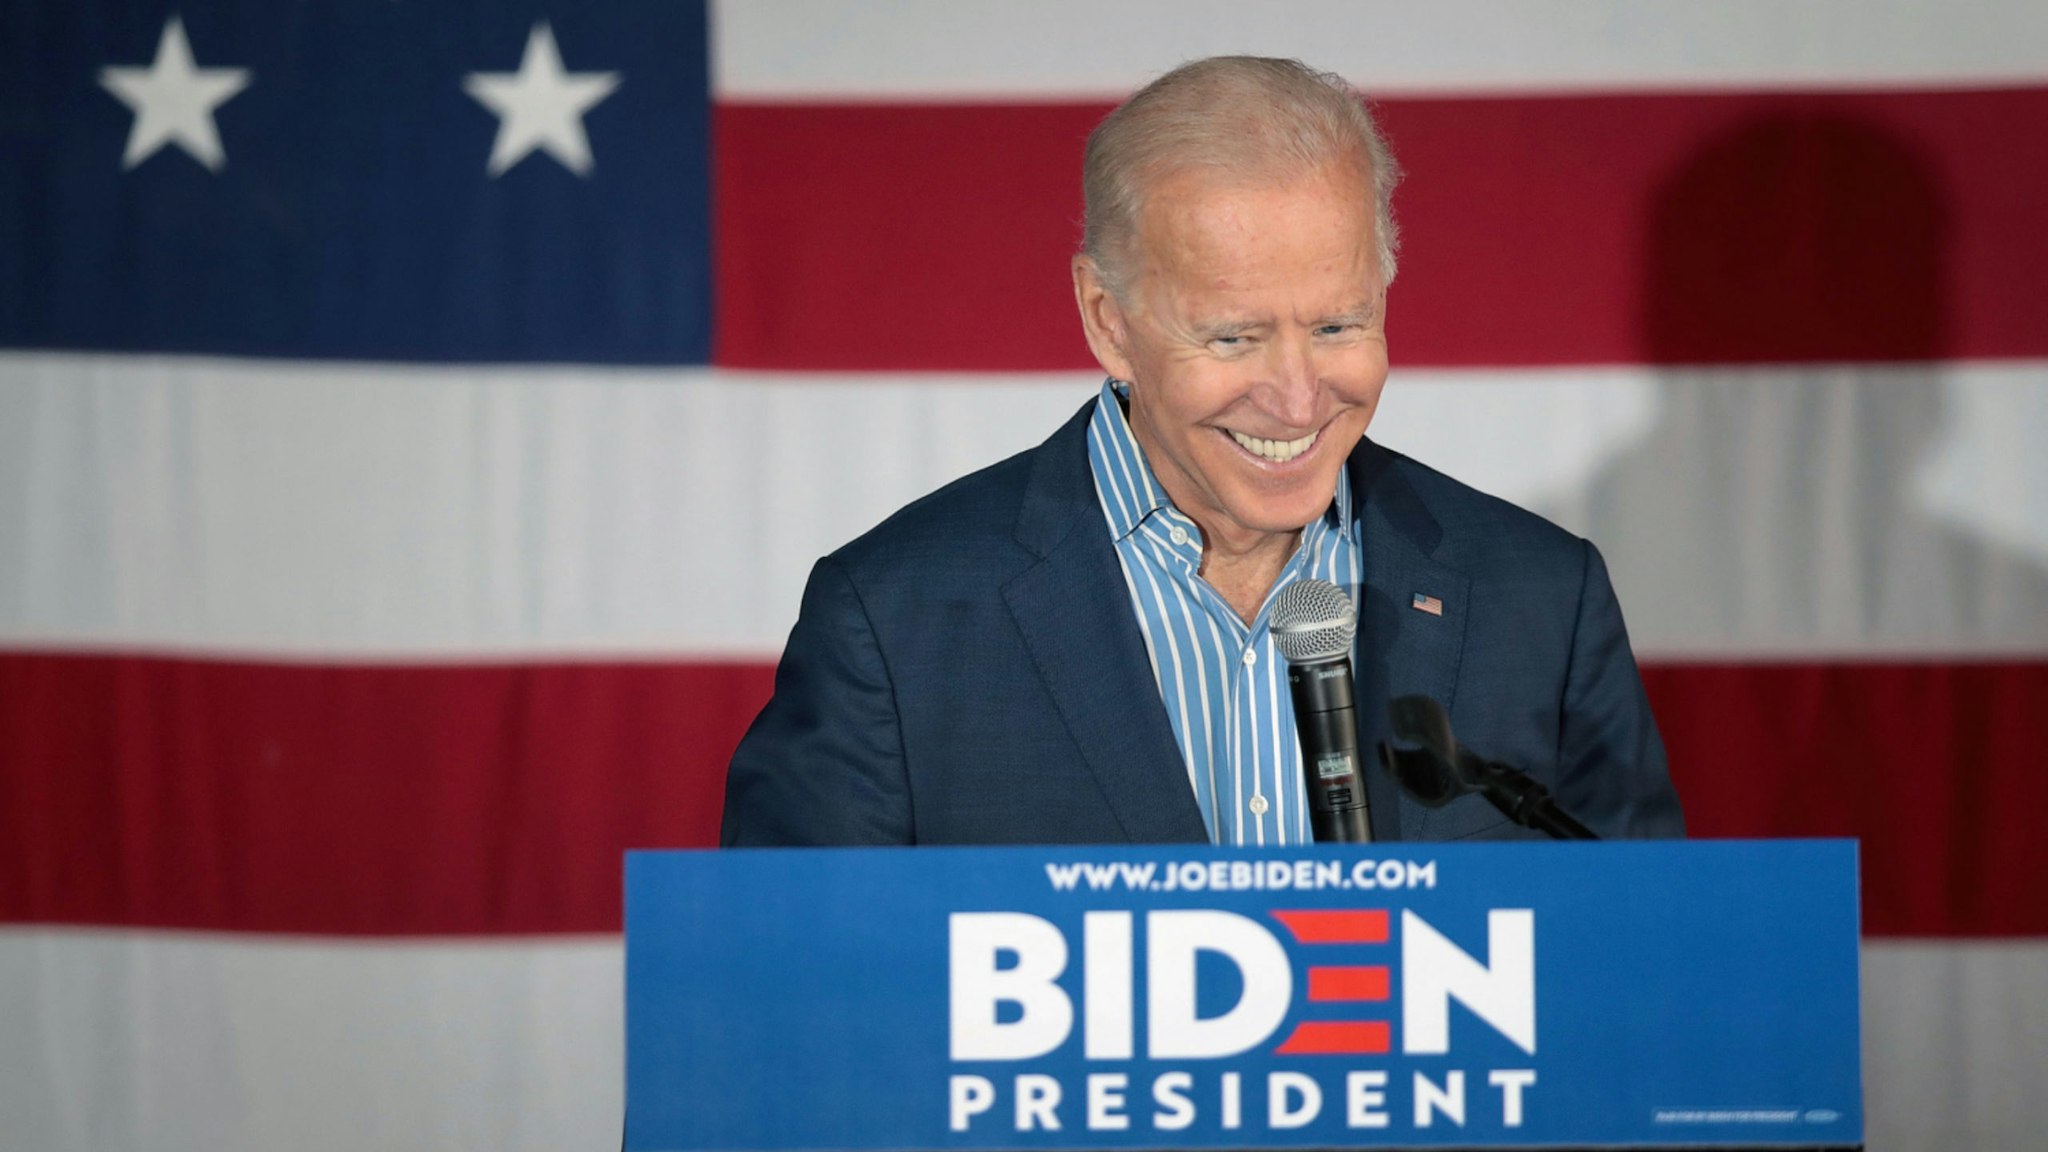 Democratic presidential candidate and former vice president Joe Biden speaks to guests during a campaign event at Big Grove Brewery and Taproom on May 1, 2019 in Iowa City, Iowa.